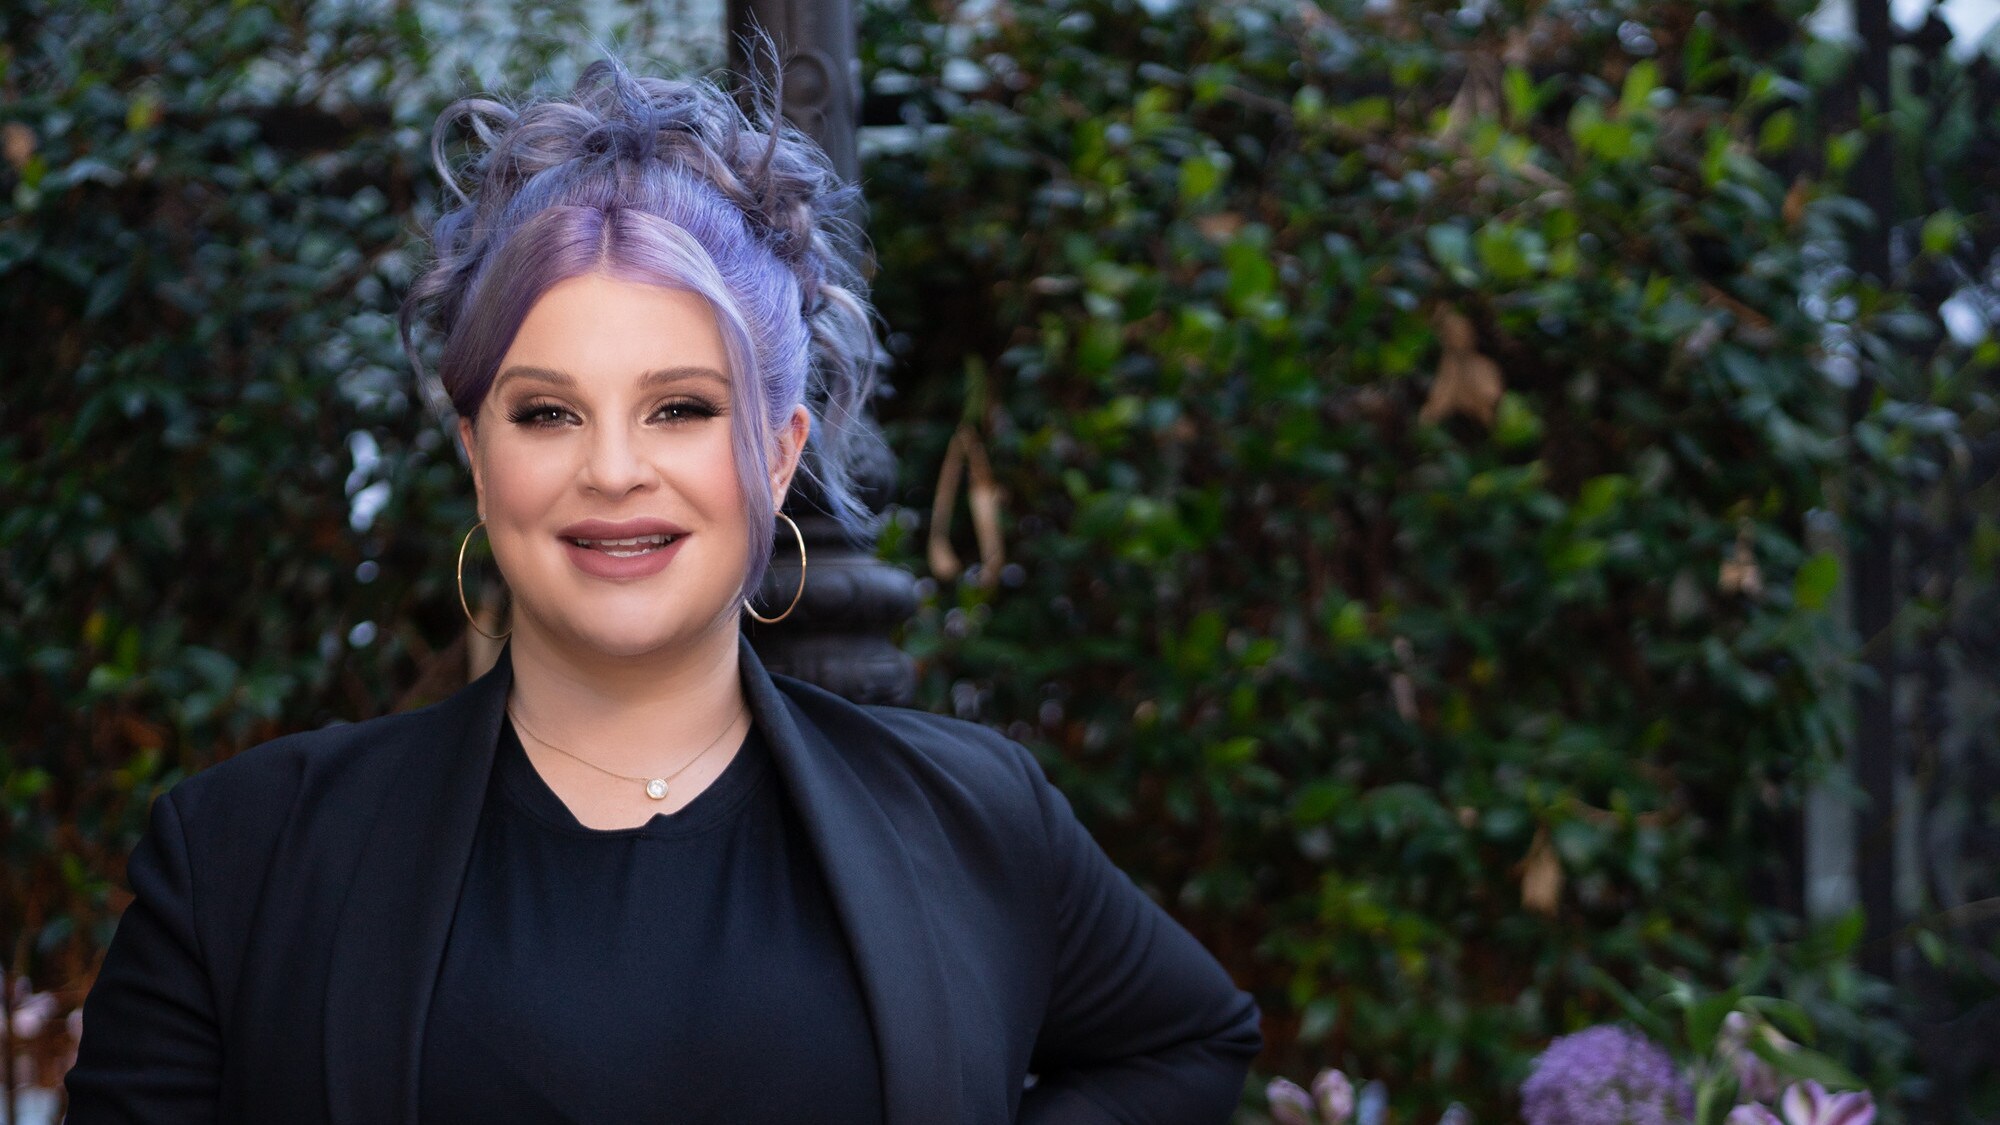 Kelly Osbourne on Turning the Tables with Robin Roberts. In season 2 of Turning the Tables with Robin Roberts, Robin Roberts gets personal with a new group of Hollywood's iconic women as they bear witness to their incredible journeys on their path to purpose. (Disney/Ser Baffo)